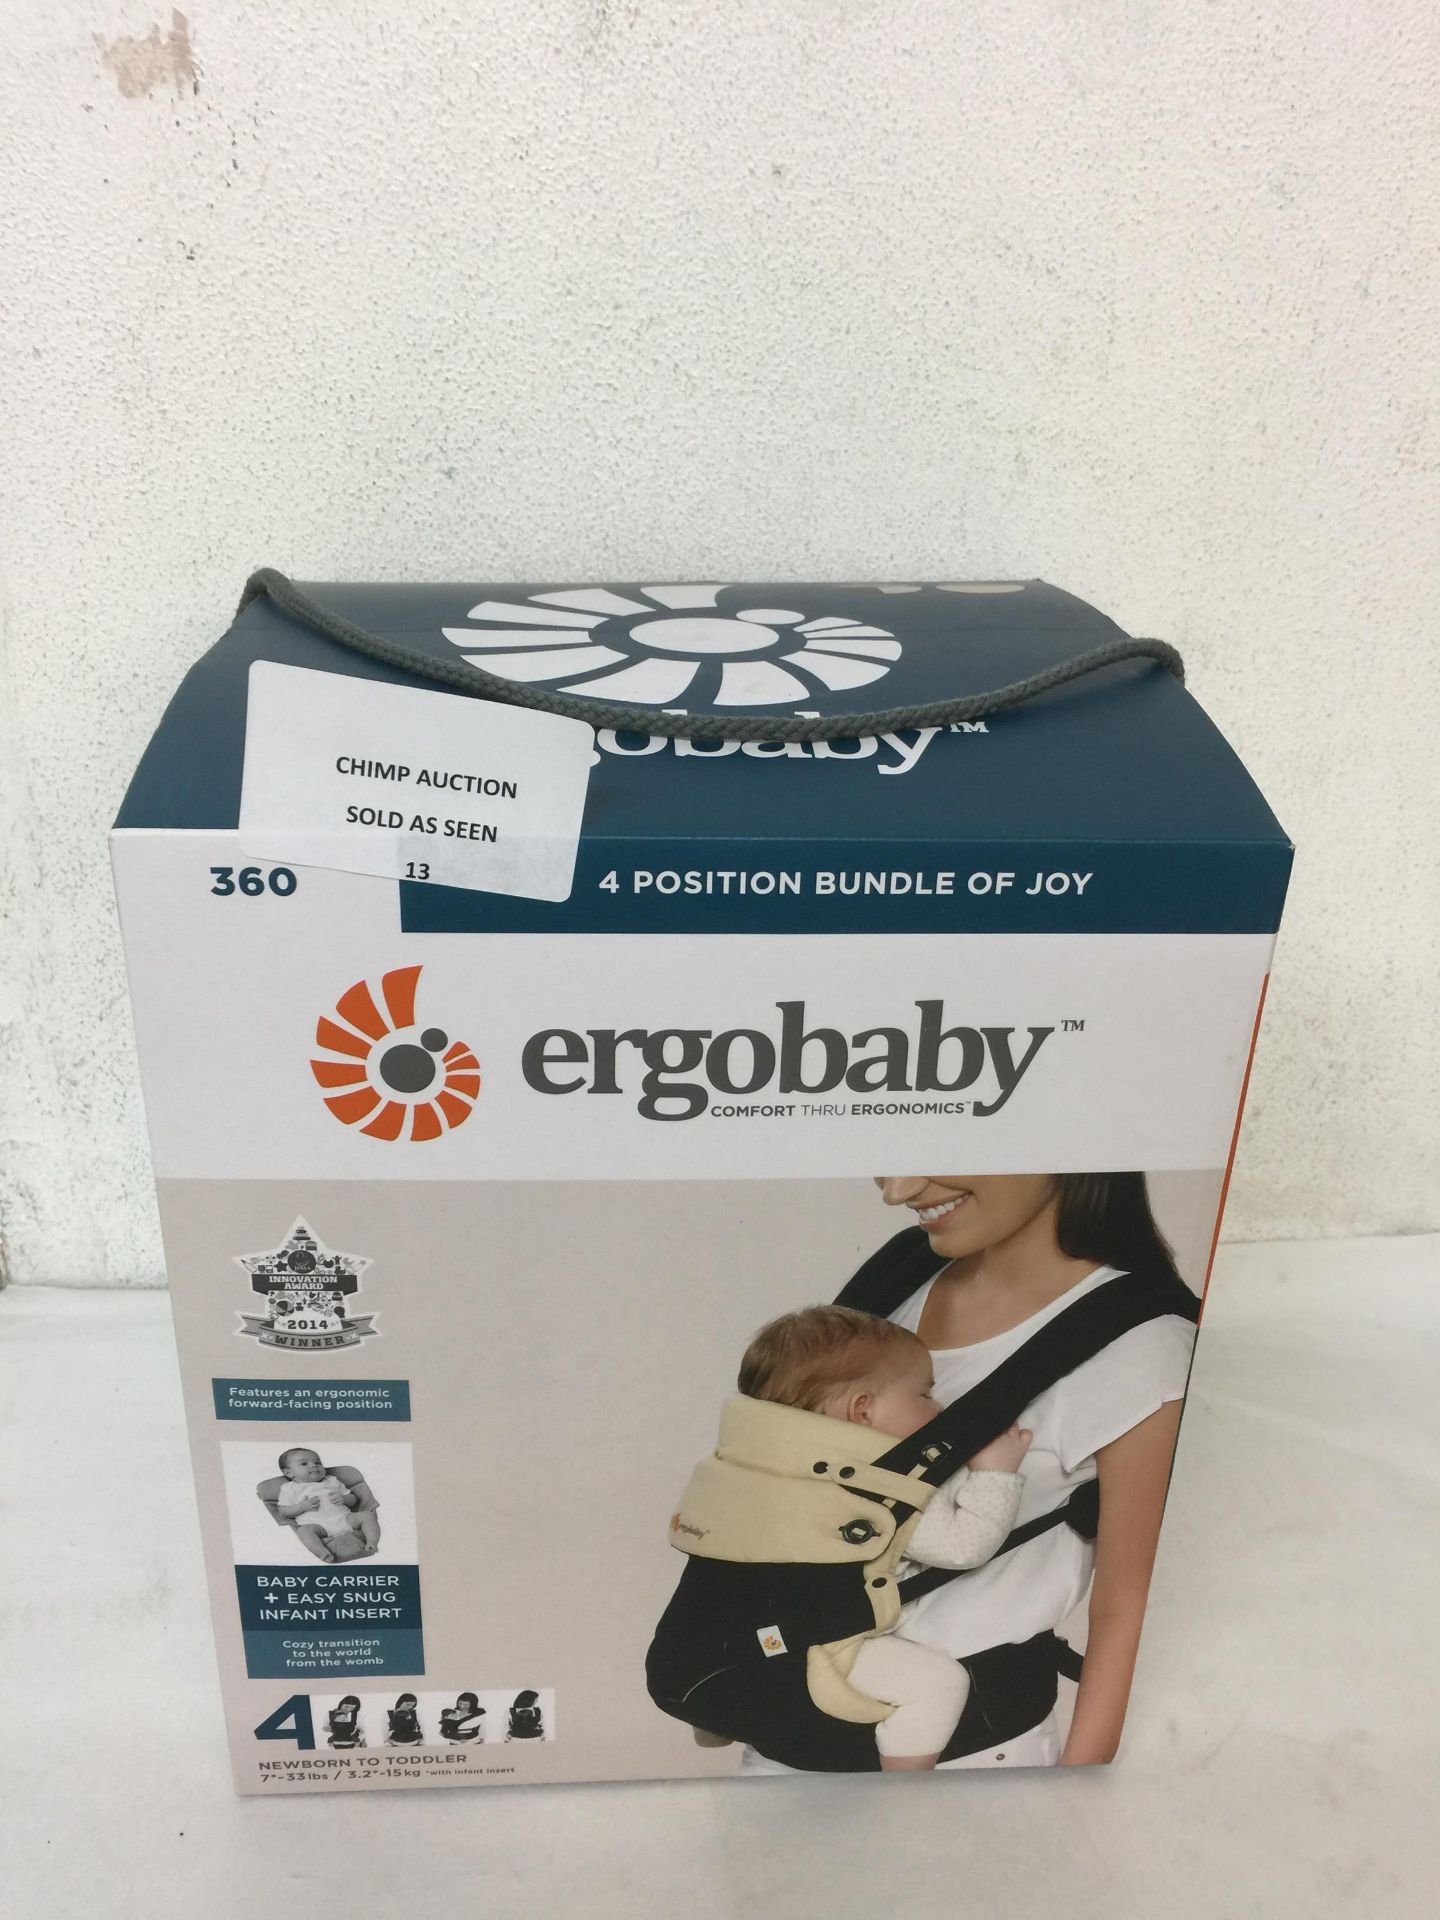 Ergobaby baby carrier collection 360 -bundle of joy- RRP £139.99